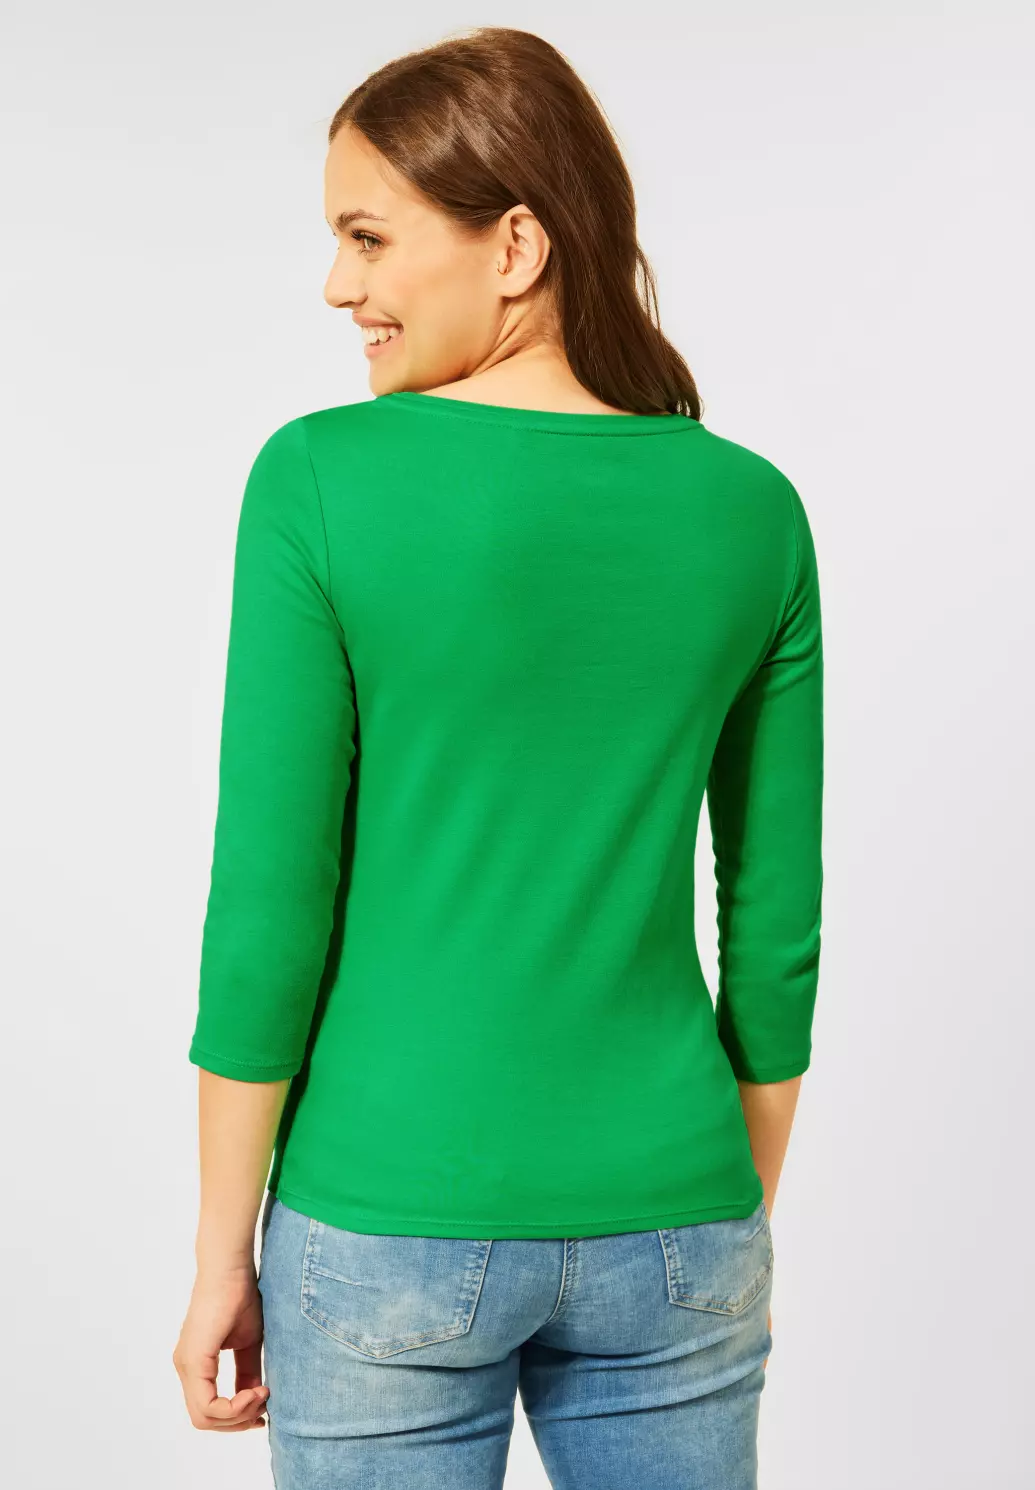 - | CECIL Unifarbe Radiant Blues Green Basic Shirt in - Cotton